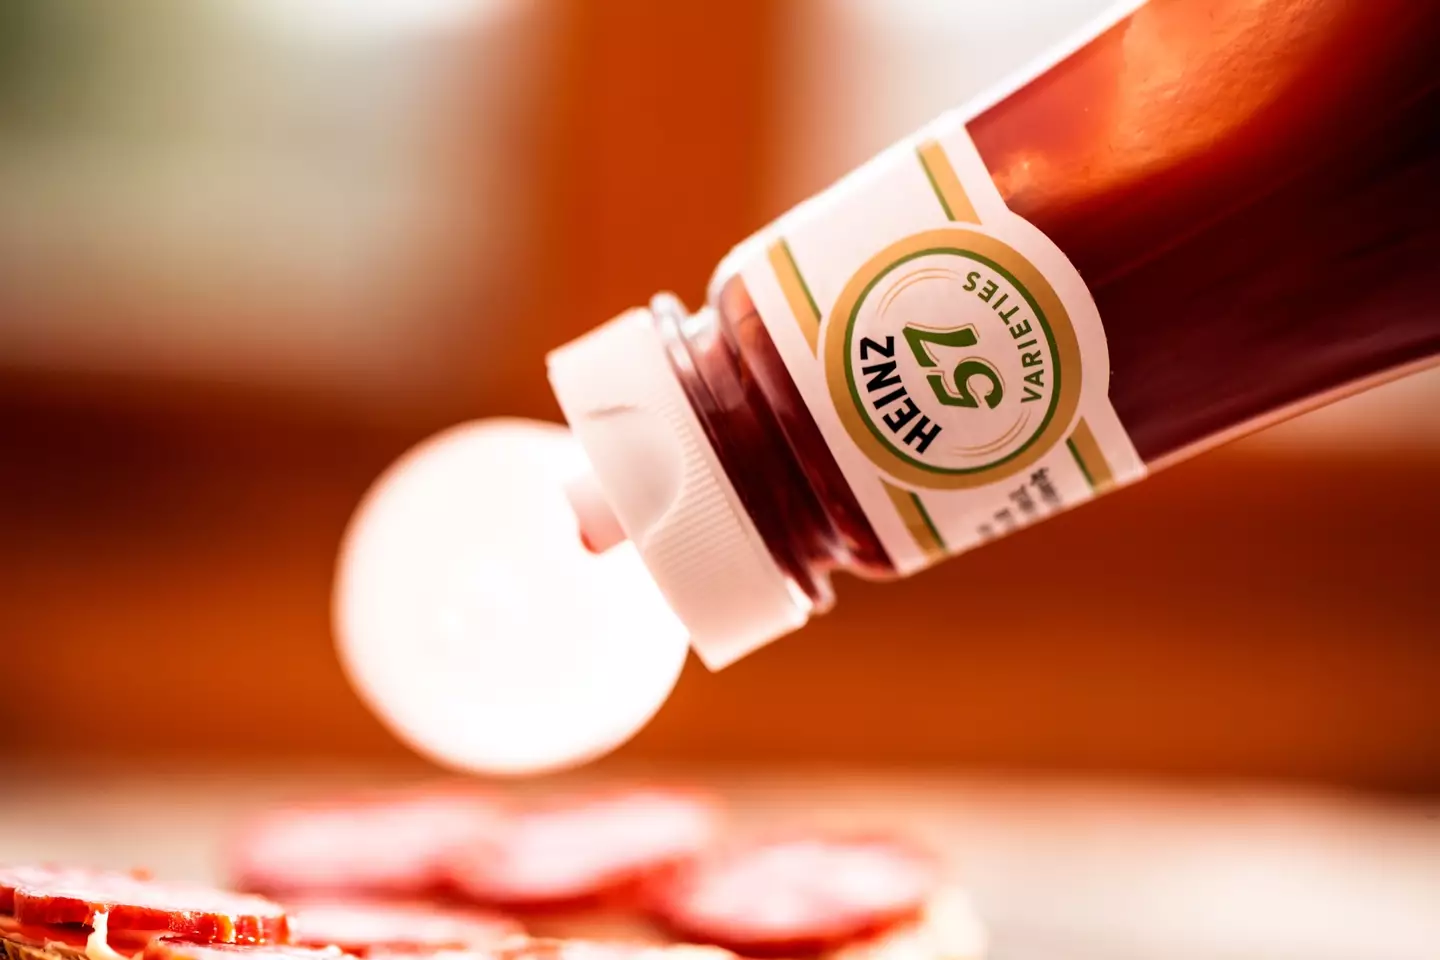 Have you spotted the number 57 on Heinz bottles?